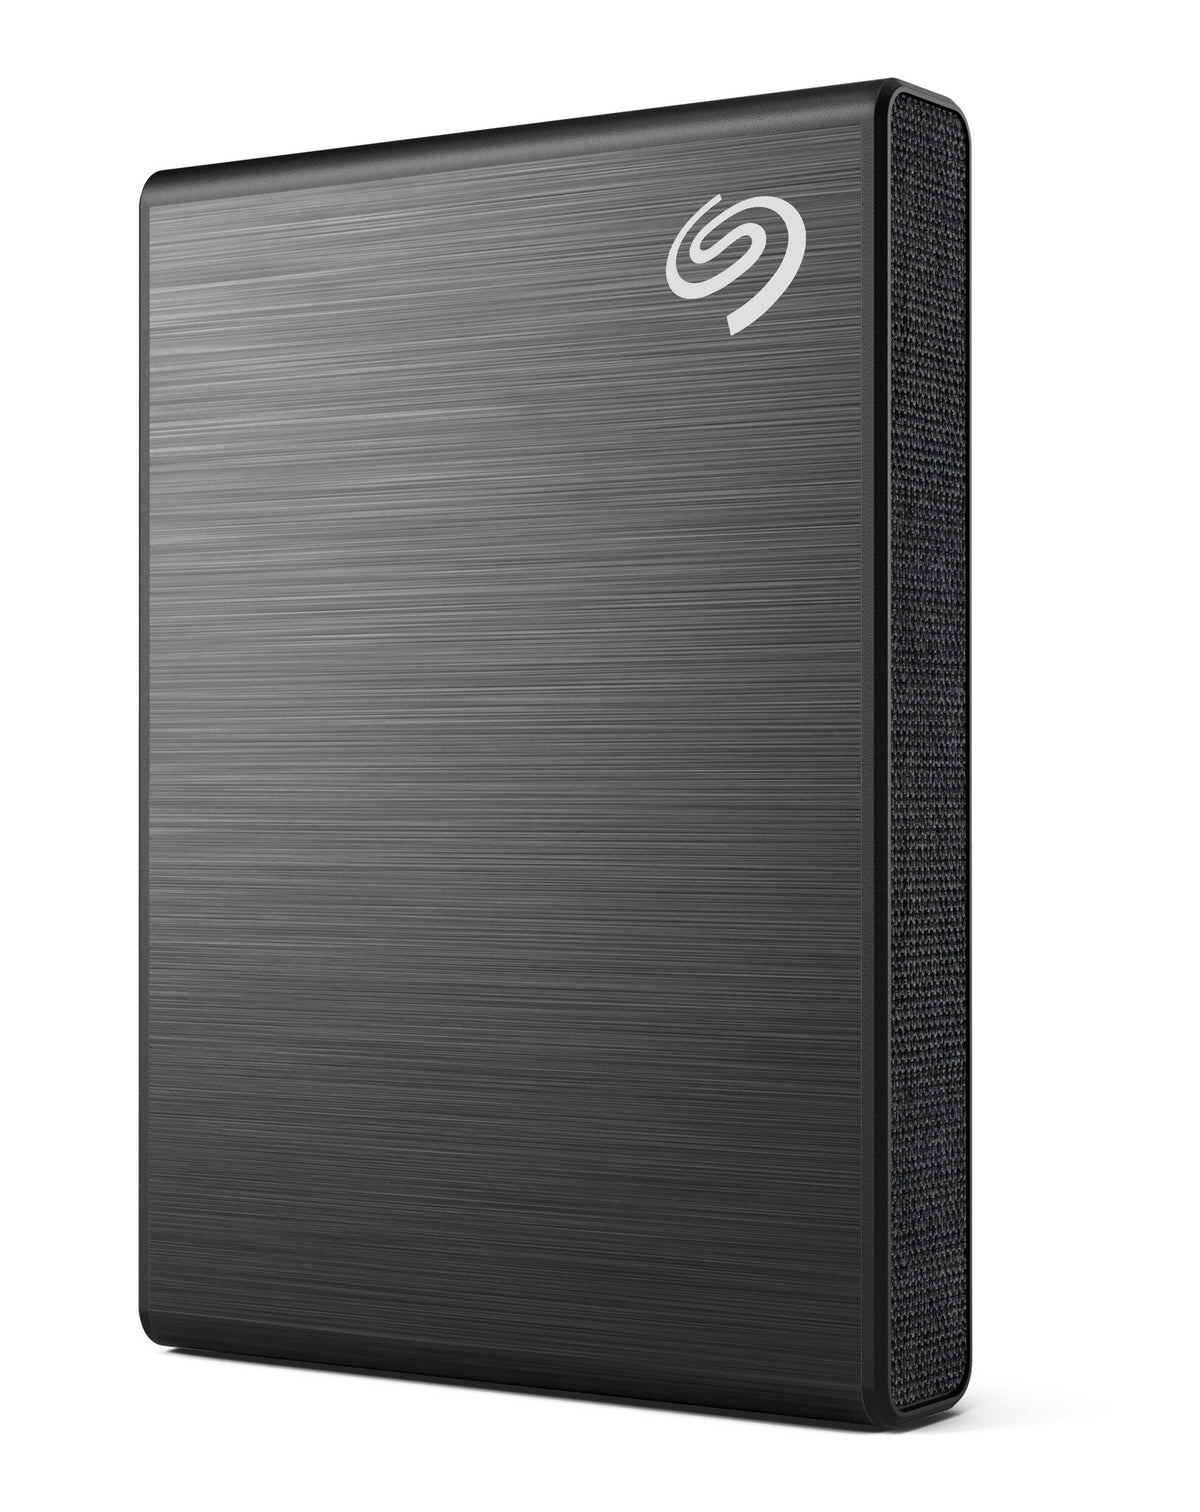 Seagate One Touch - External SSD in Black - 1 TB